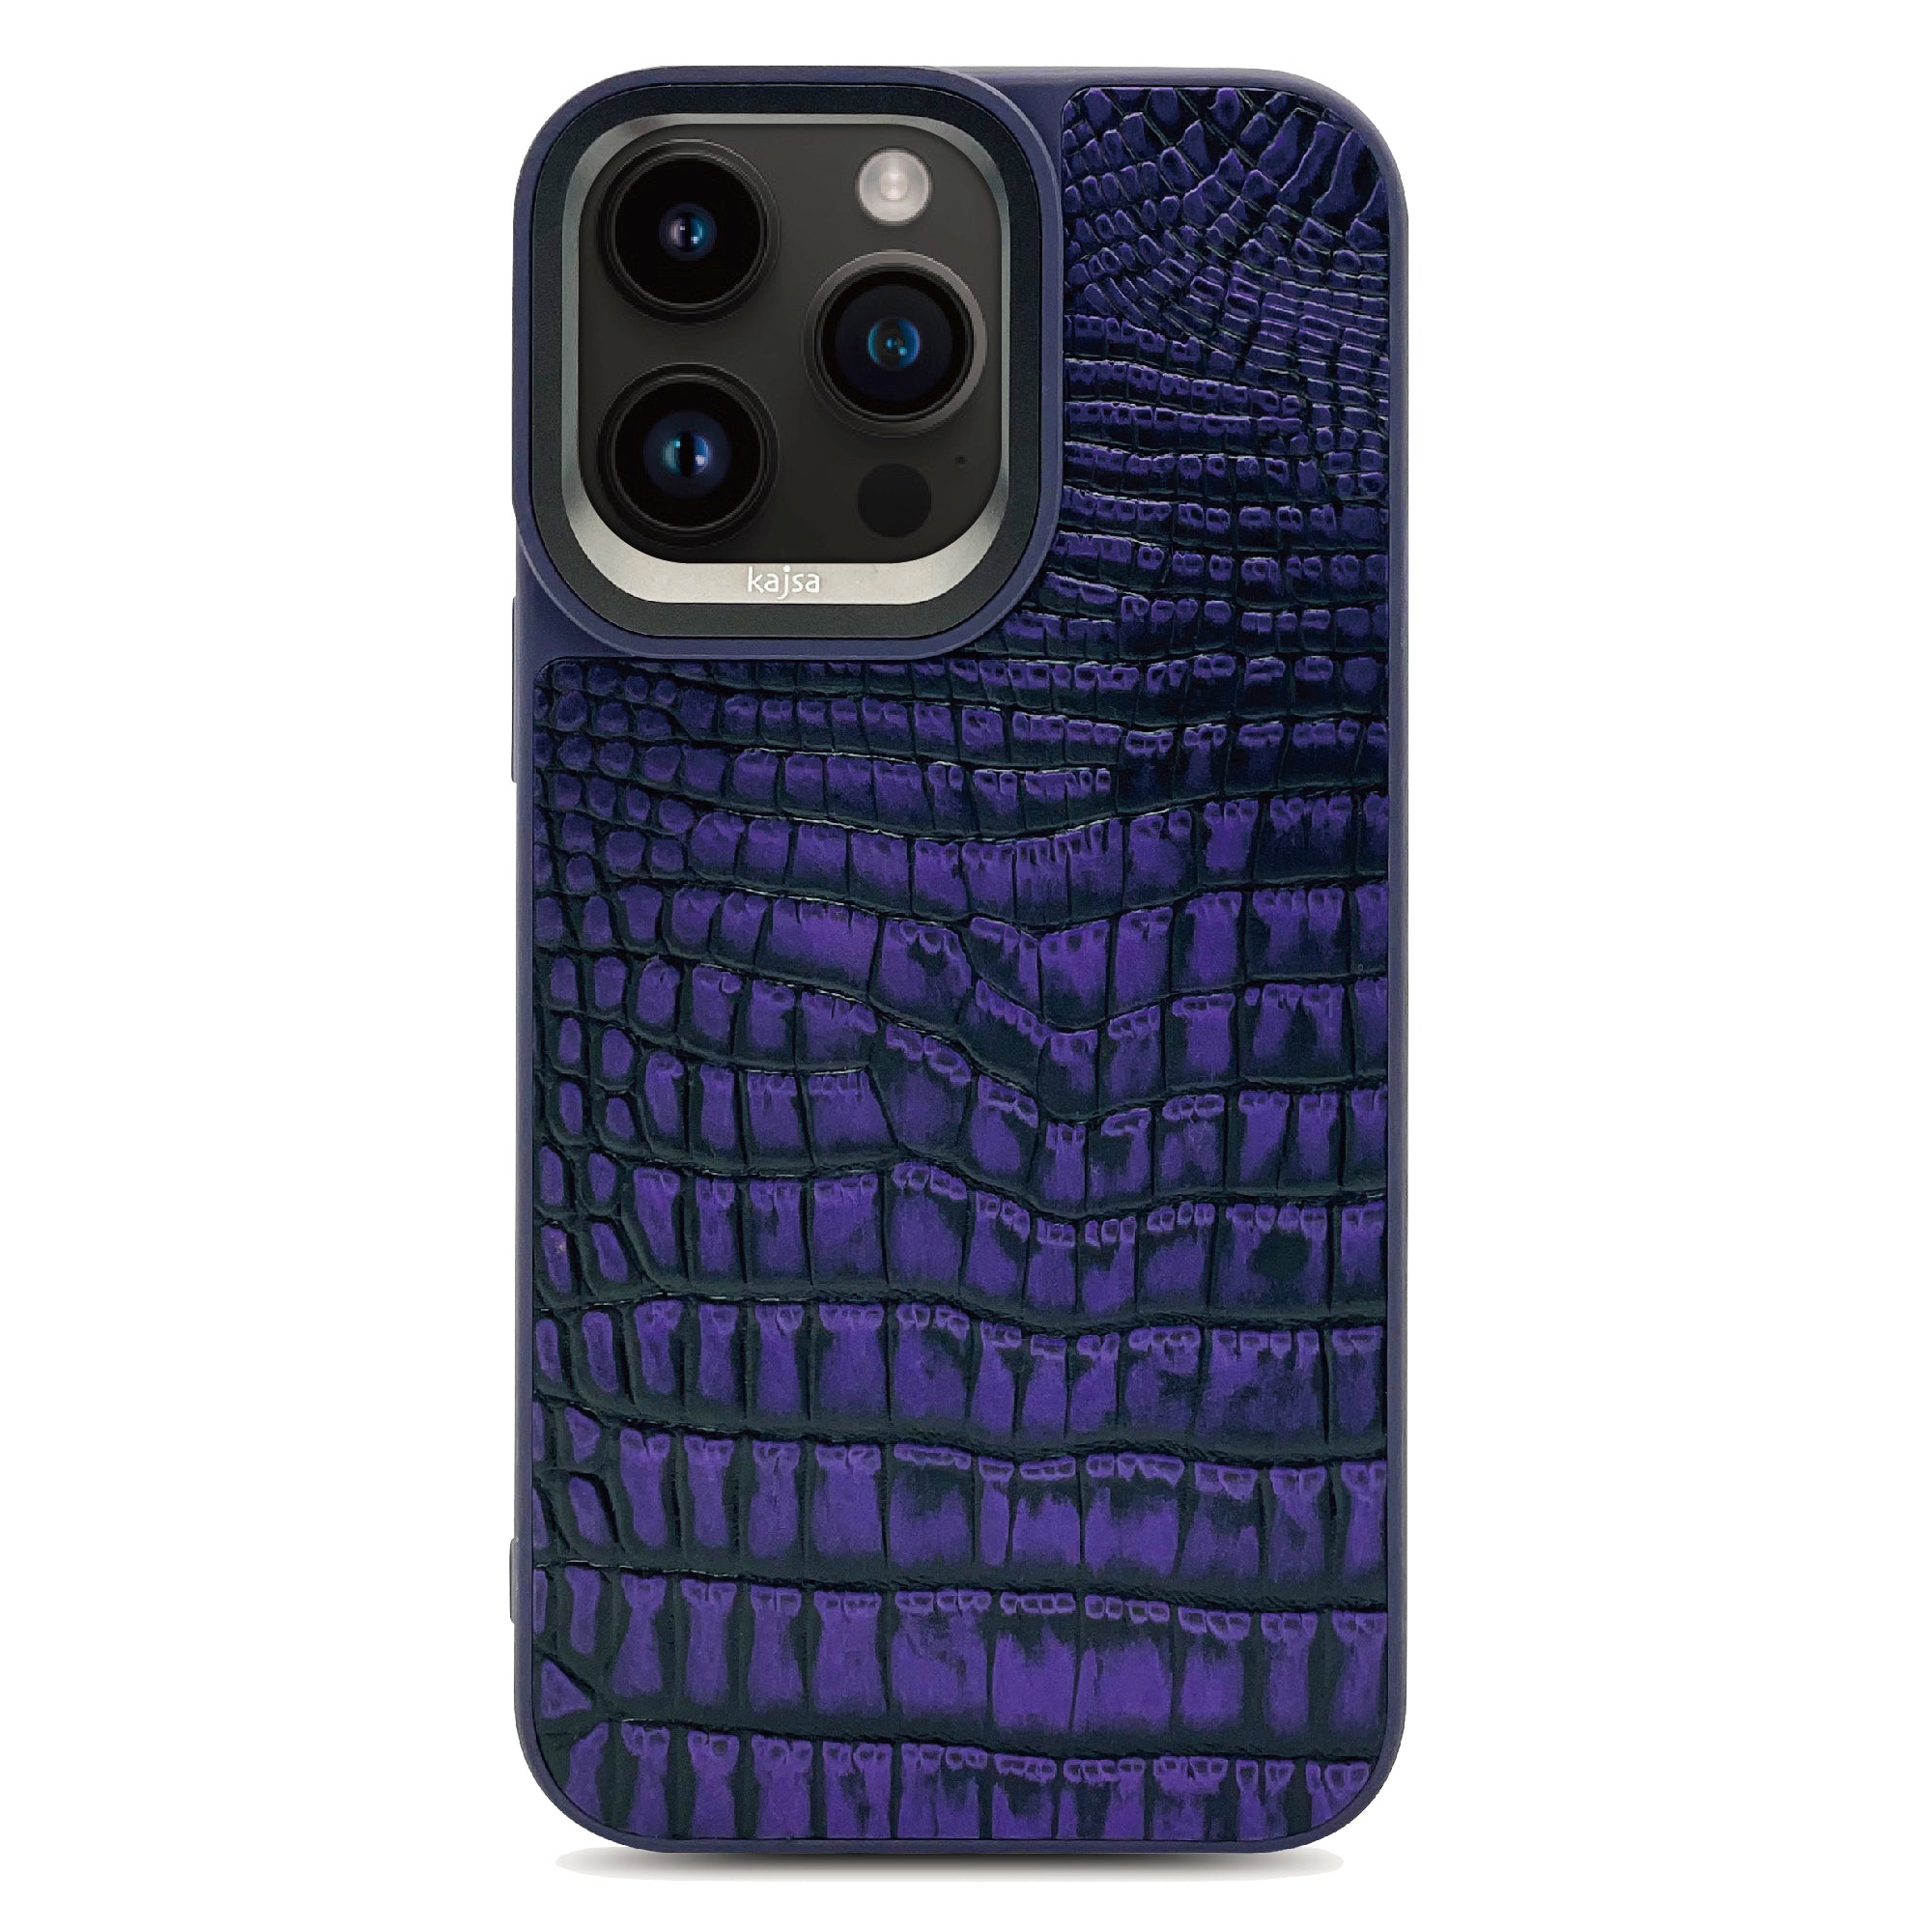 Glamorous Collection - Beast Back Case for iPhone 14-Phone Case- phone case - phone cases- phone cover- iphone cover- iphone case- iphone cases- leather case- leather cases- DIYCASE - custom case - leather cover - hand strap case - croco pattern case - snake pattern case - carbon fiber phone case - phone case brand - unique phone case - high quality - phone case brand - protective case - buy phone case hong kong - online buy phone case - iphone‎手機殼 - 客製化手機殼 - samsung ‎手機殼 - 香港手機殼 - 買電話殼